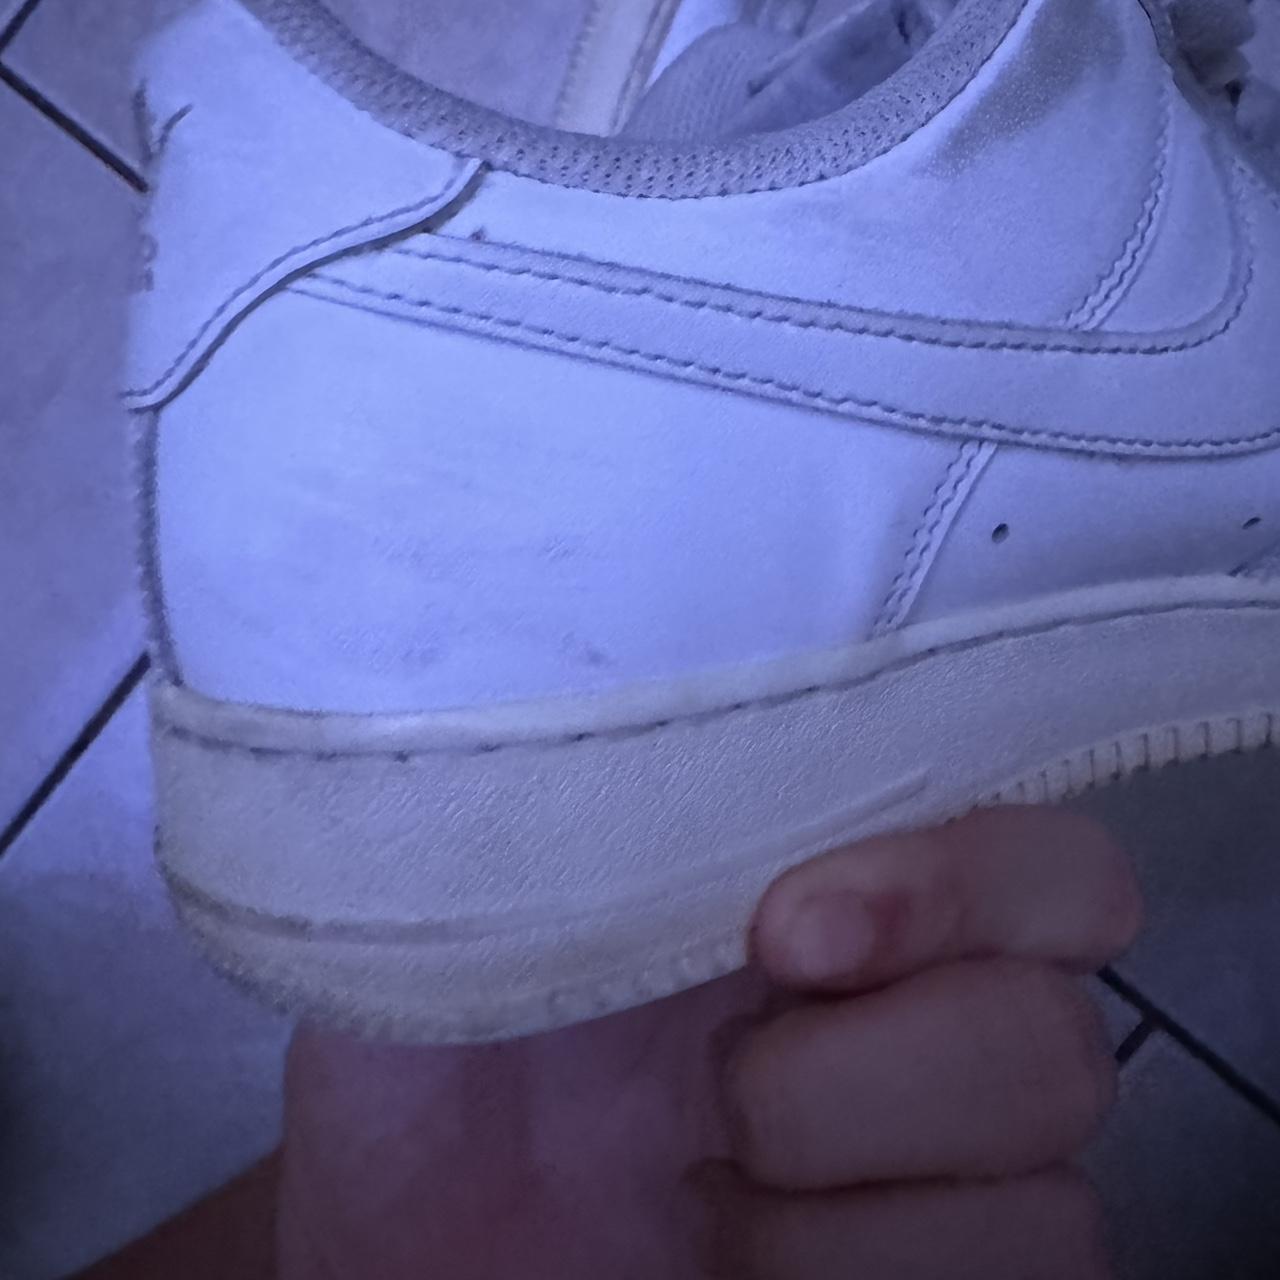 Beaters AF1 just send a offer i will probably take it - Depop